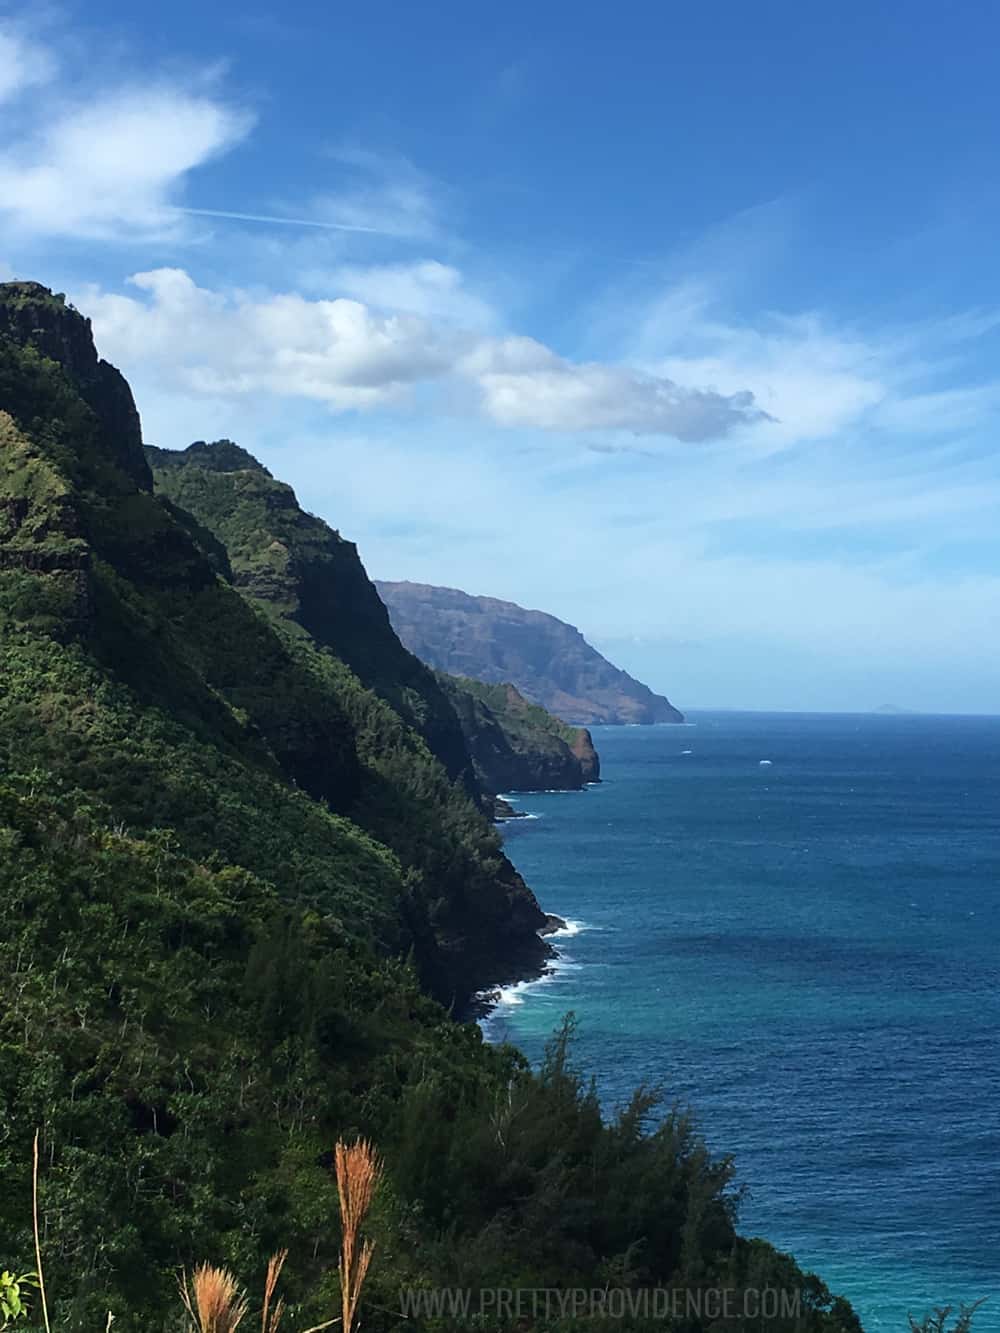 Must do when you go to Kauai! From what to do for fun, to where to eat, to where all the must have treats are! 